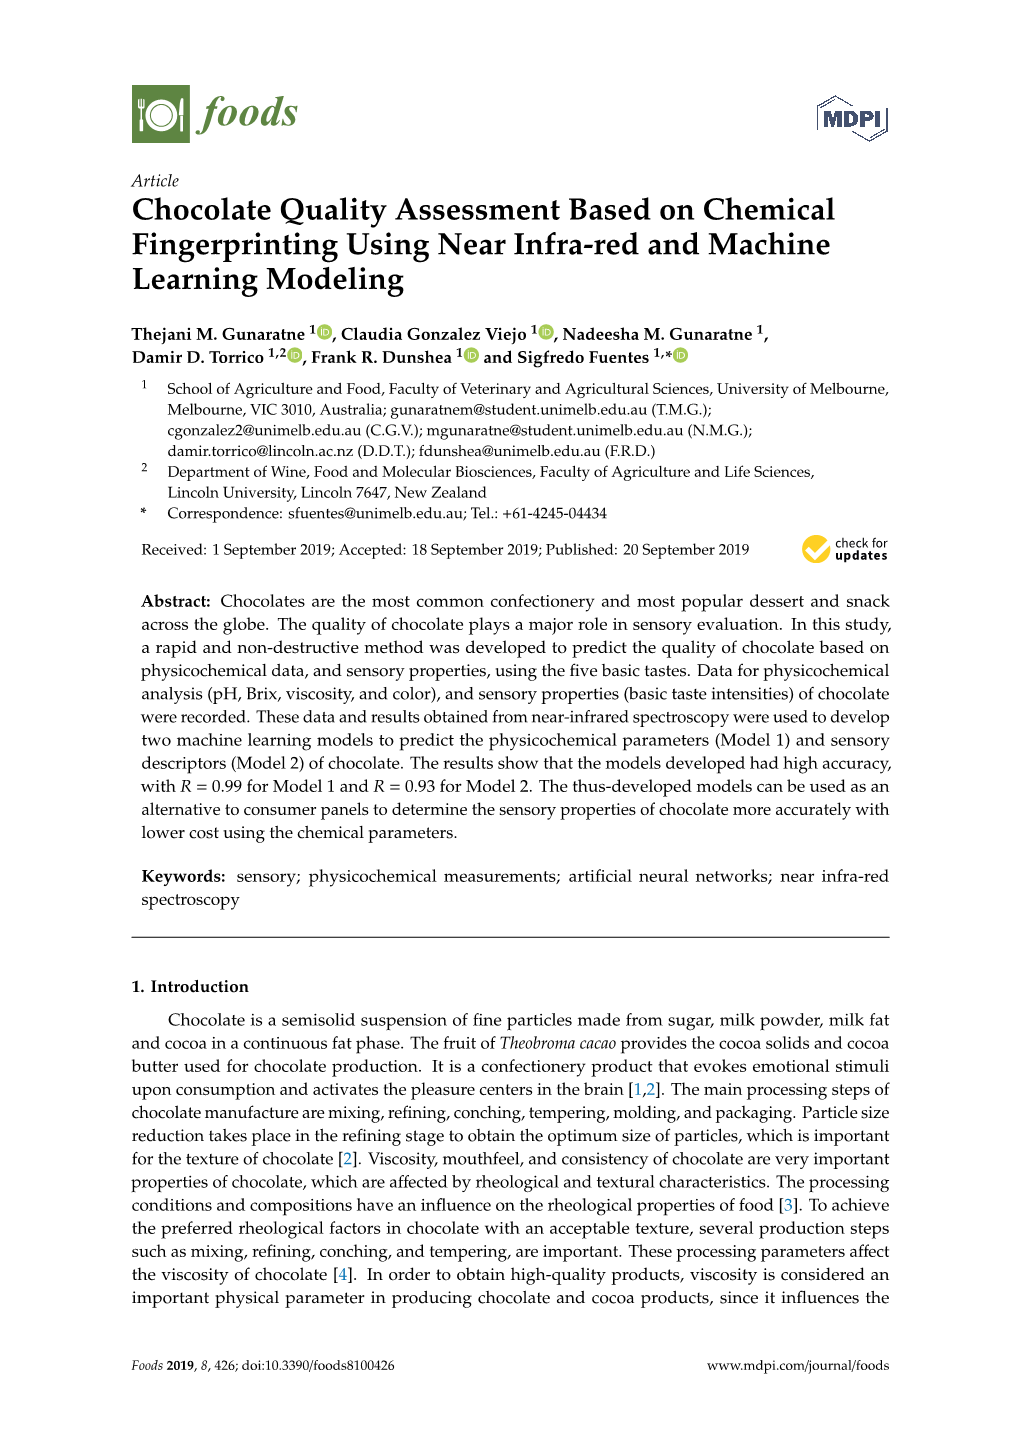 Chocolate Quality Assessment Based on Chemical Fingerprinting Using Near Infra-Red and Machine Learning Modeling